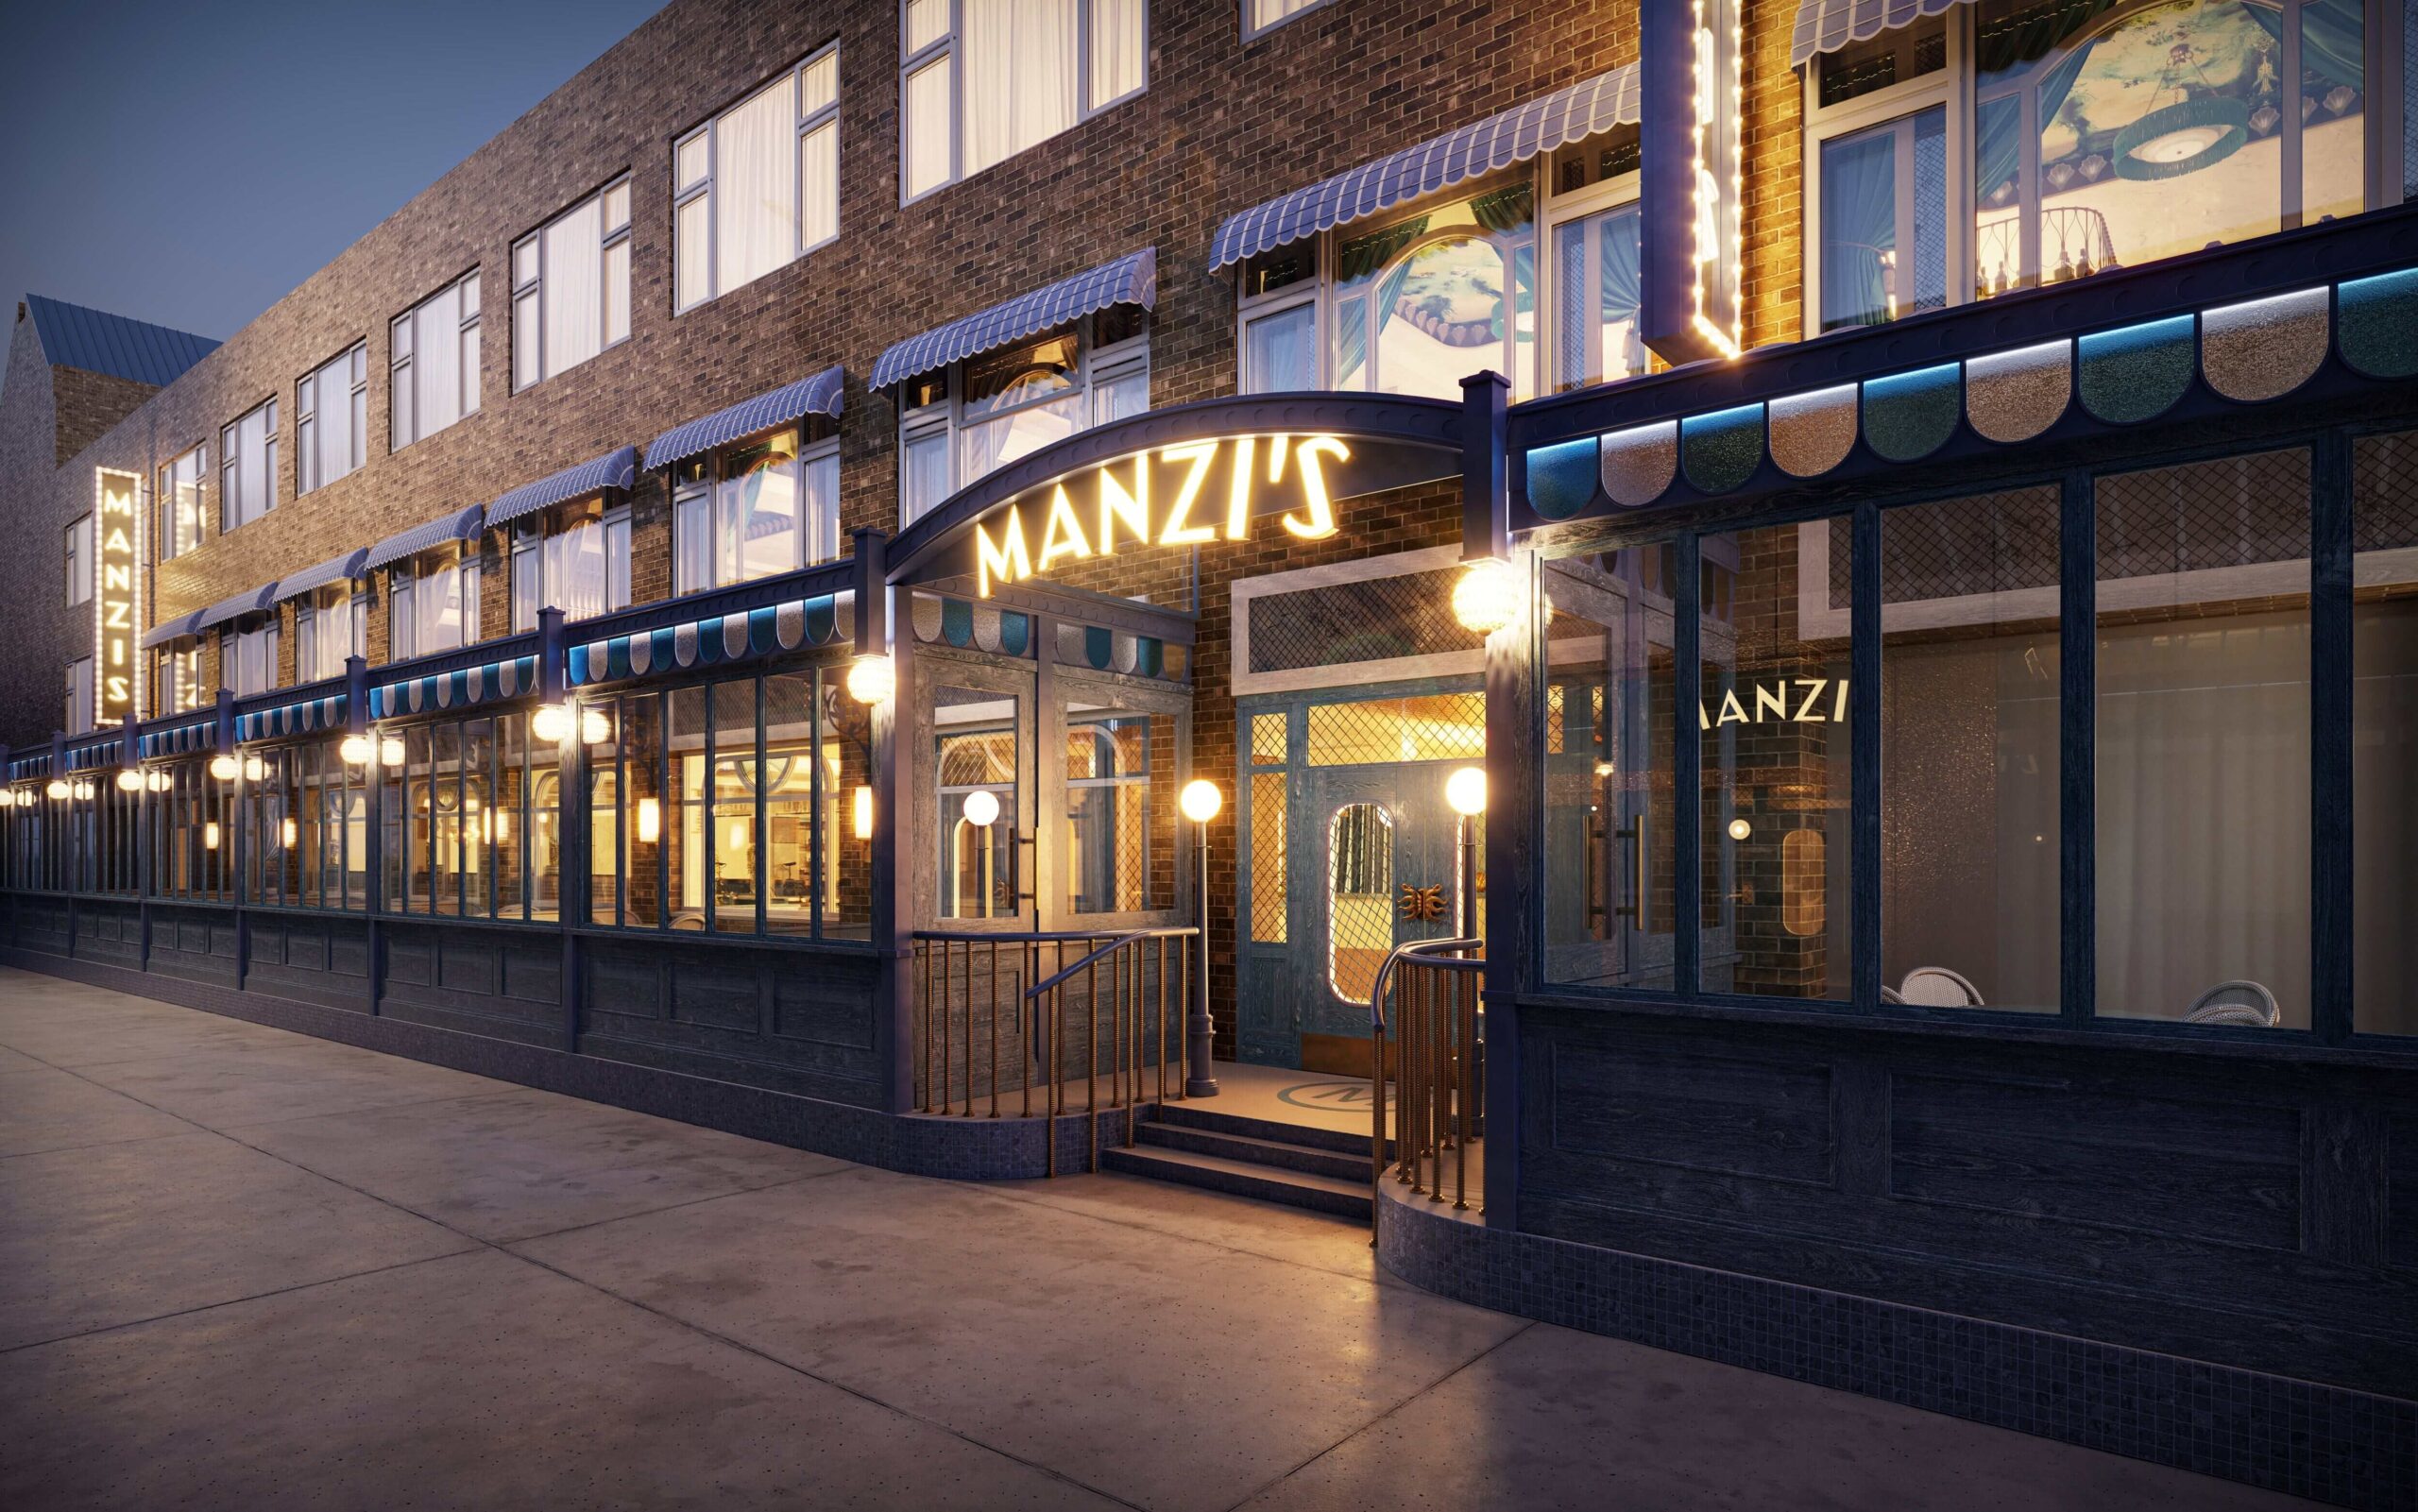 Our sibling restaurant, Manzi’s